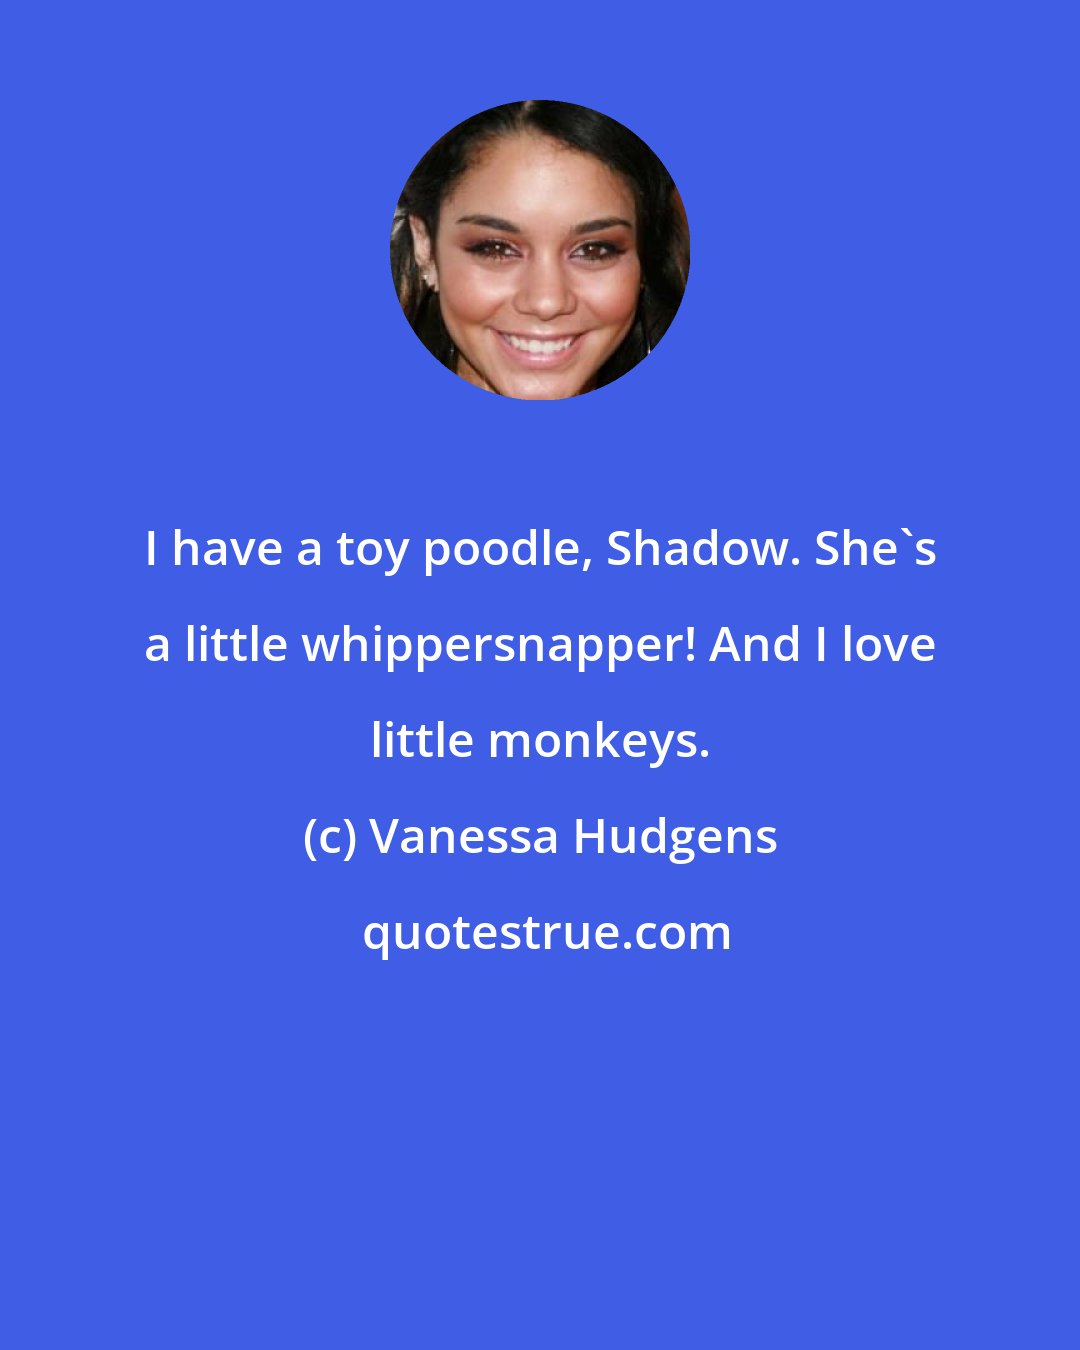 Vanessa Hudgens: I have a toy poodle, Shadow. She's a little whippersnapper! And I love little monkeys.